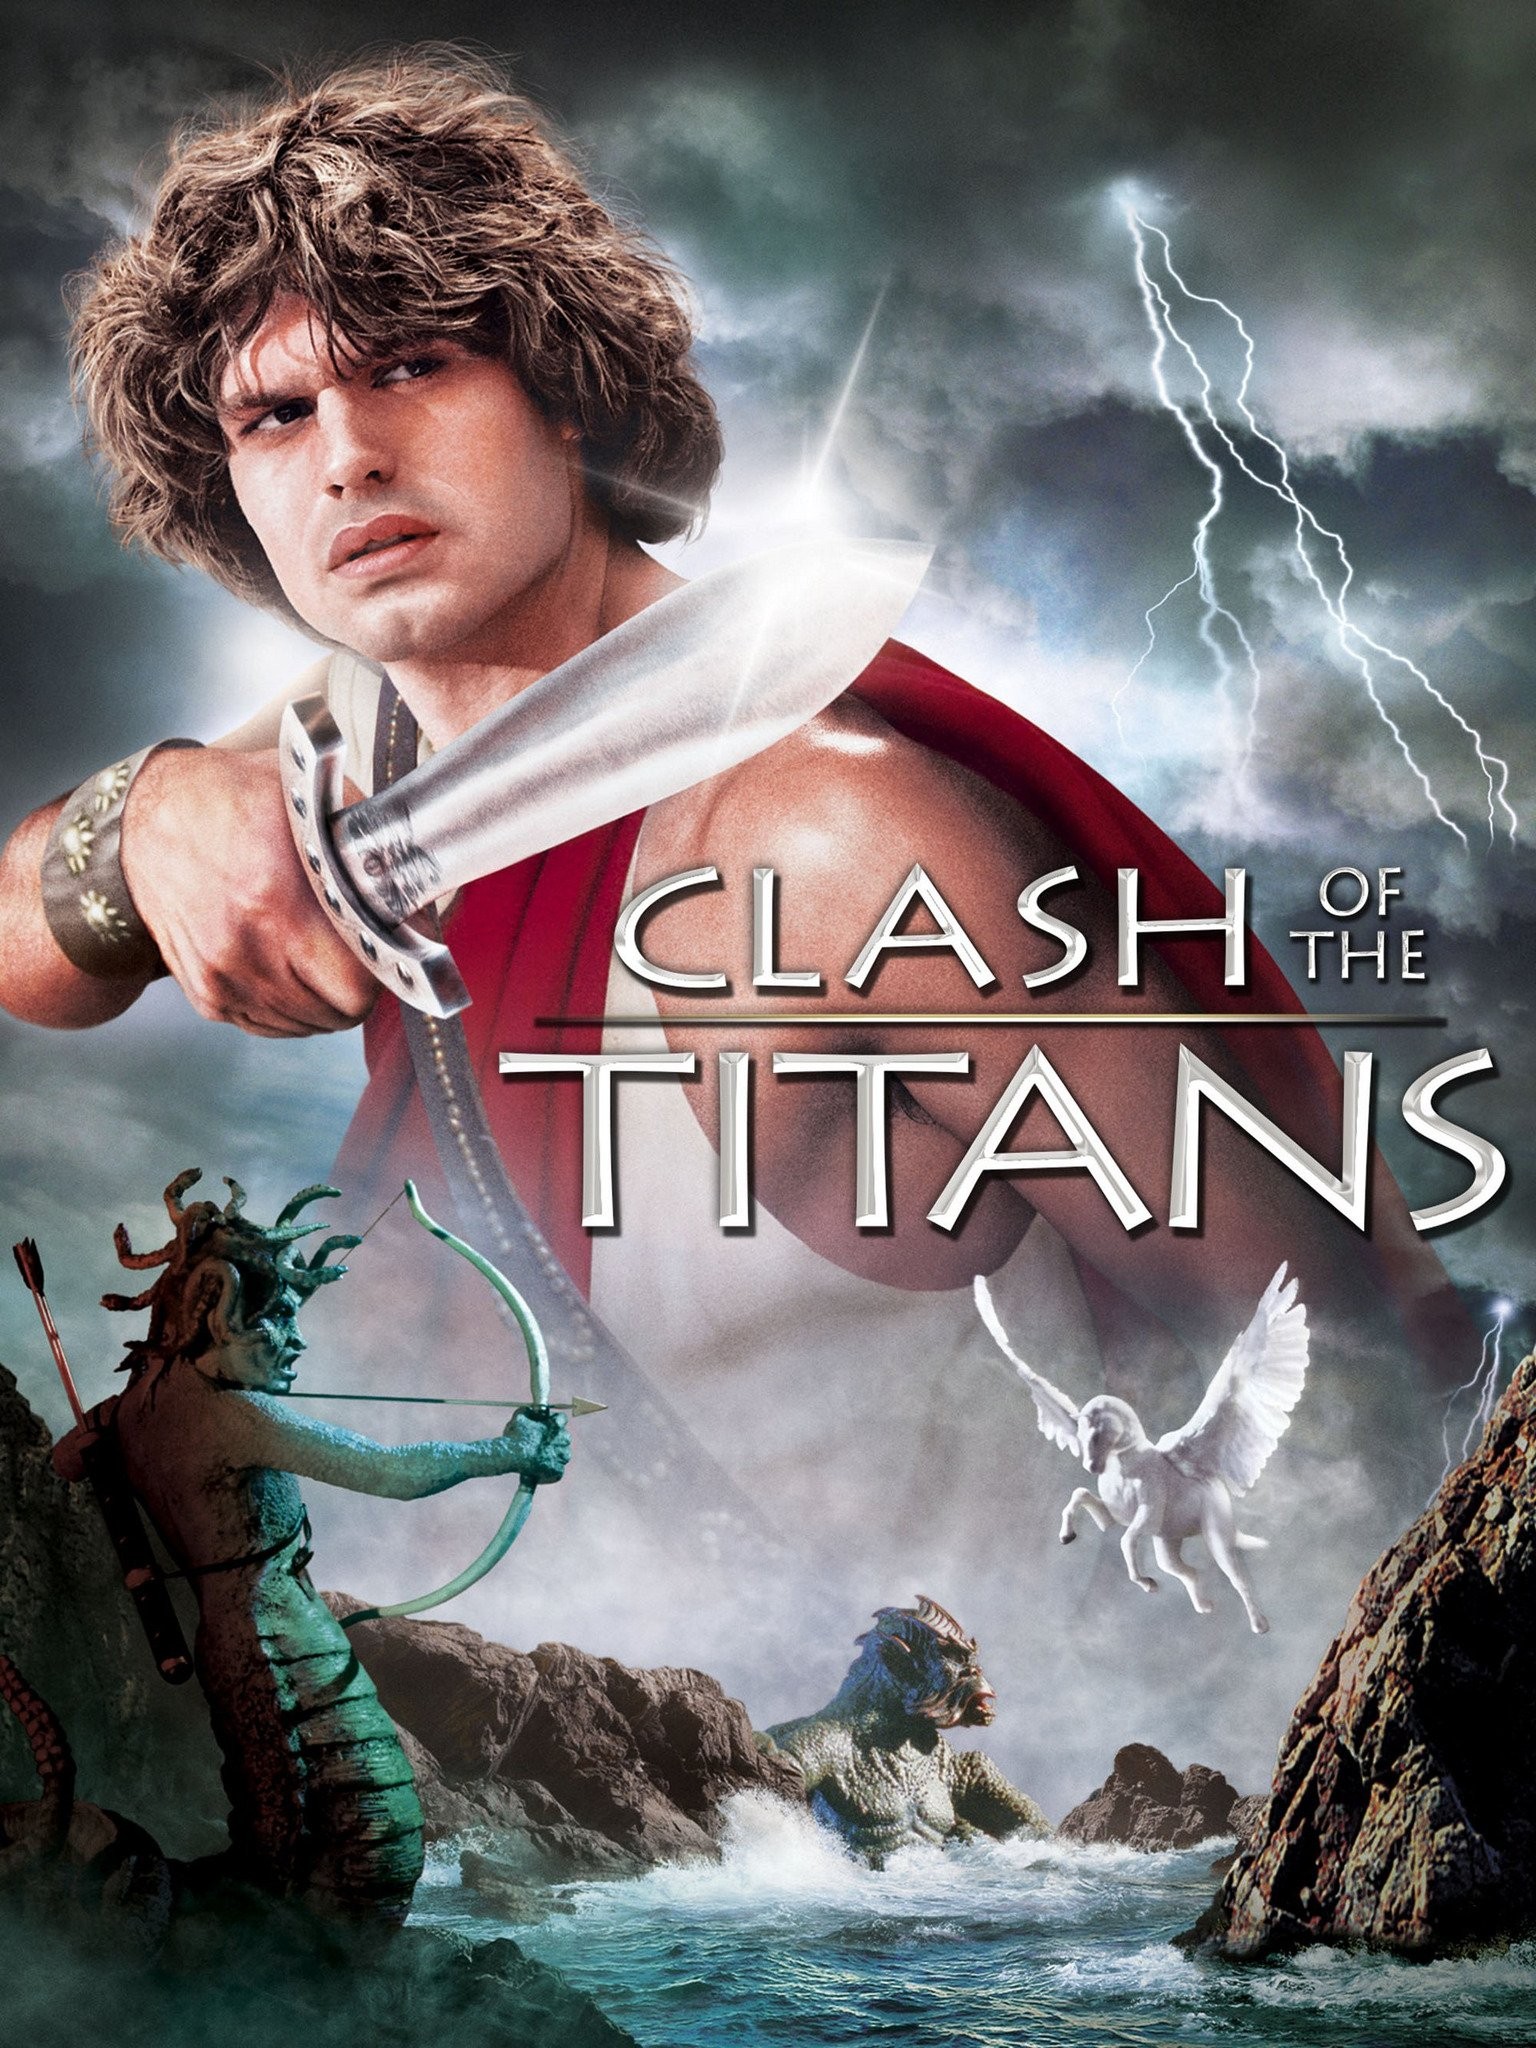 Clash of the Titans - Rotten Tomatoes